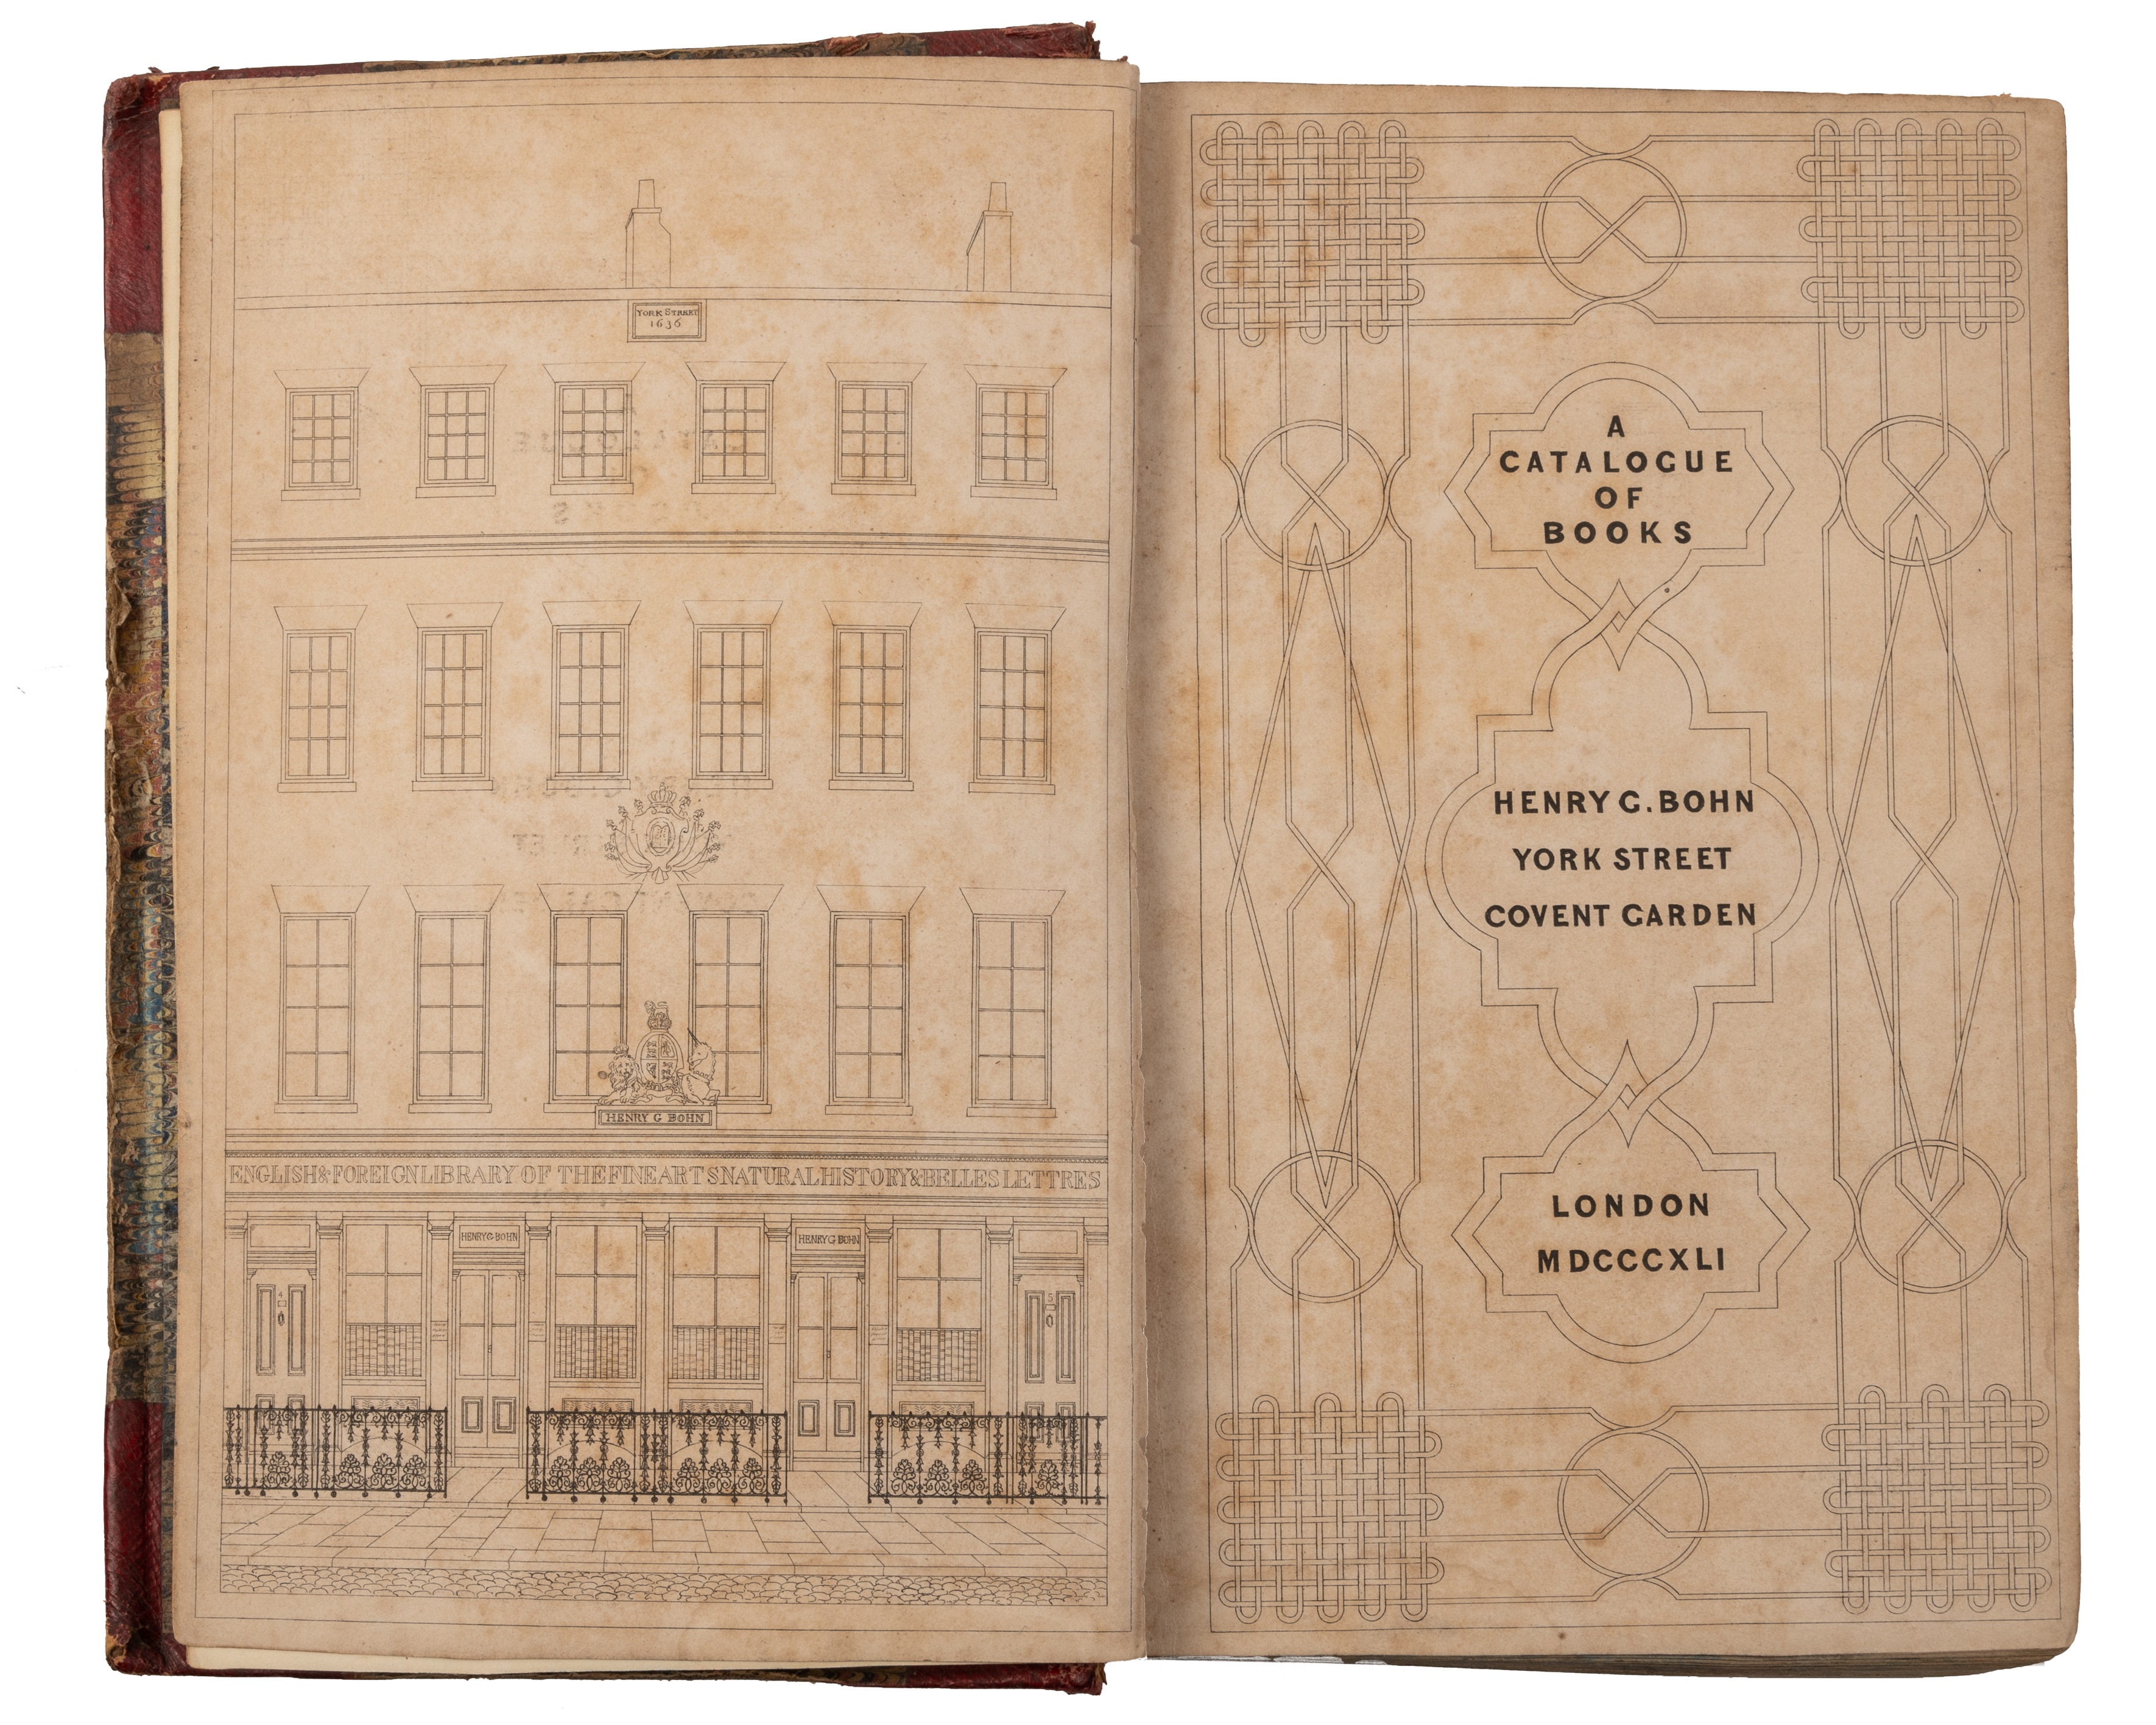 Bohn (Henry C). York St, Covent Garden, London. 'A Catalogue of Books' 1841 with engraved title - Image 2 of 2